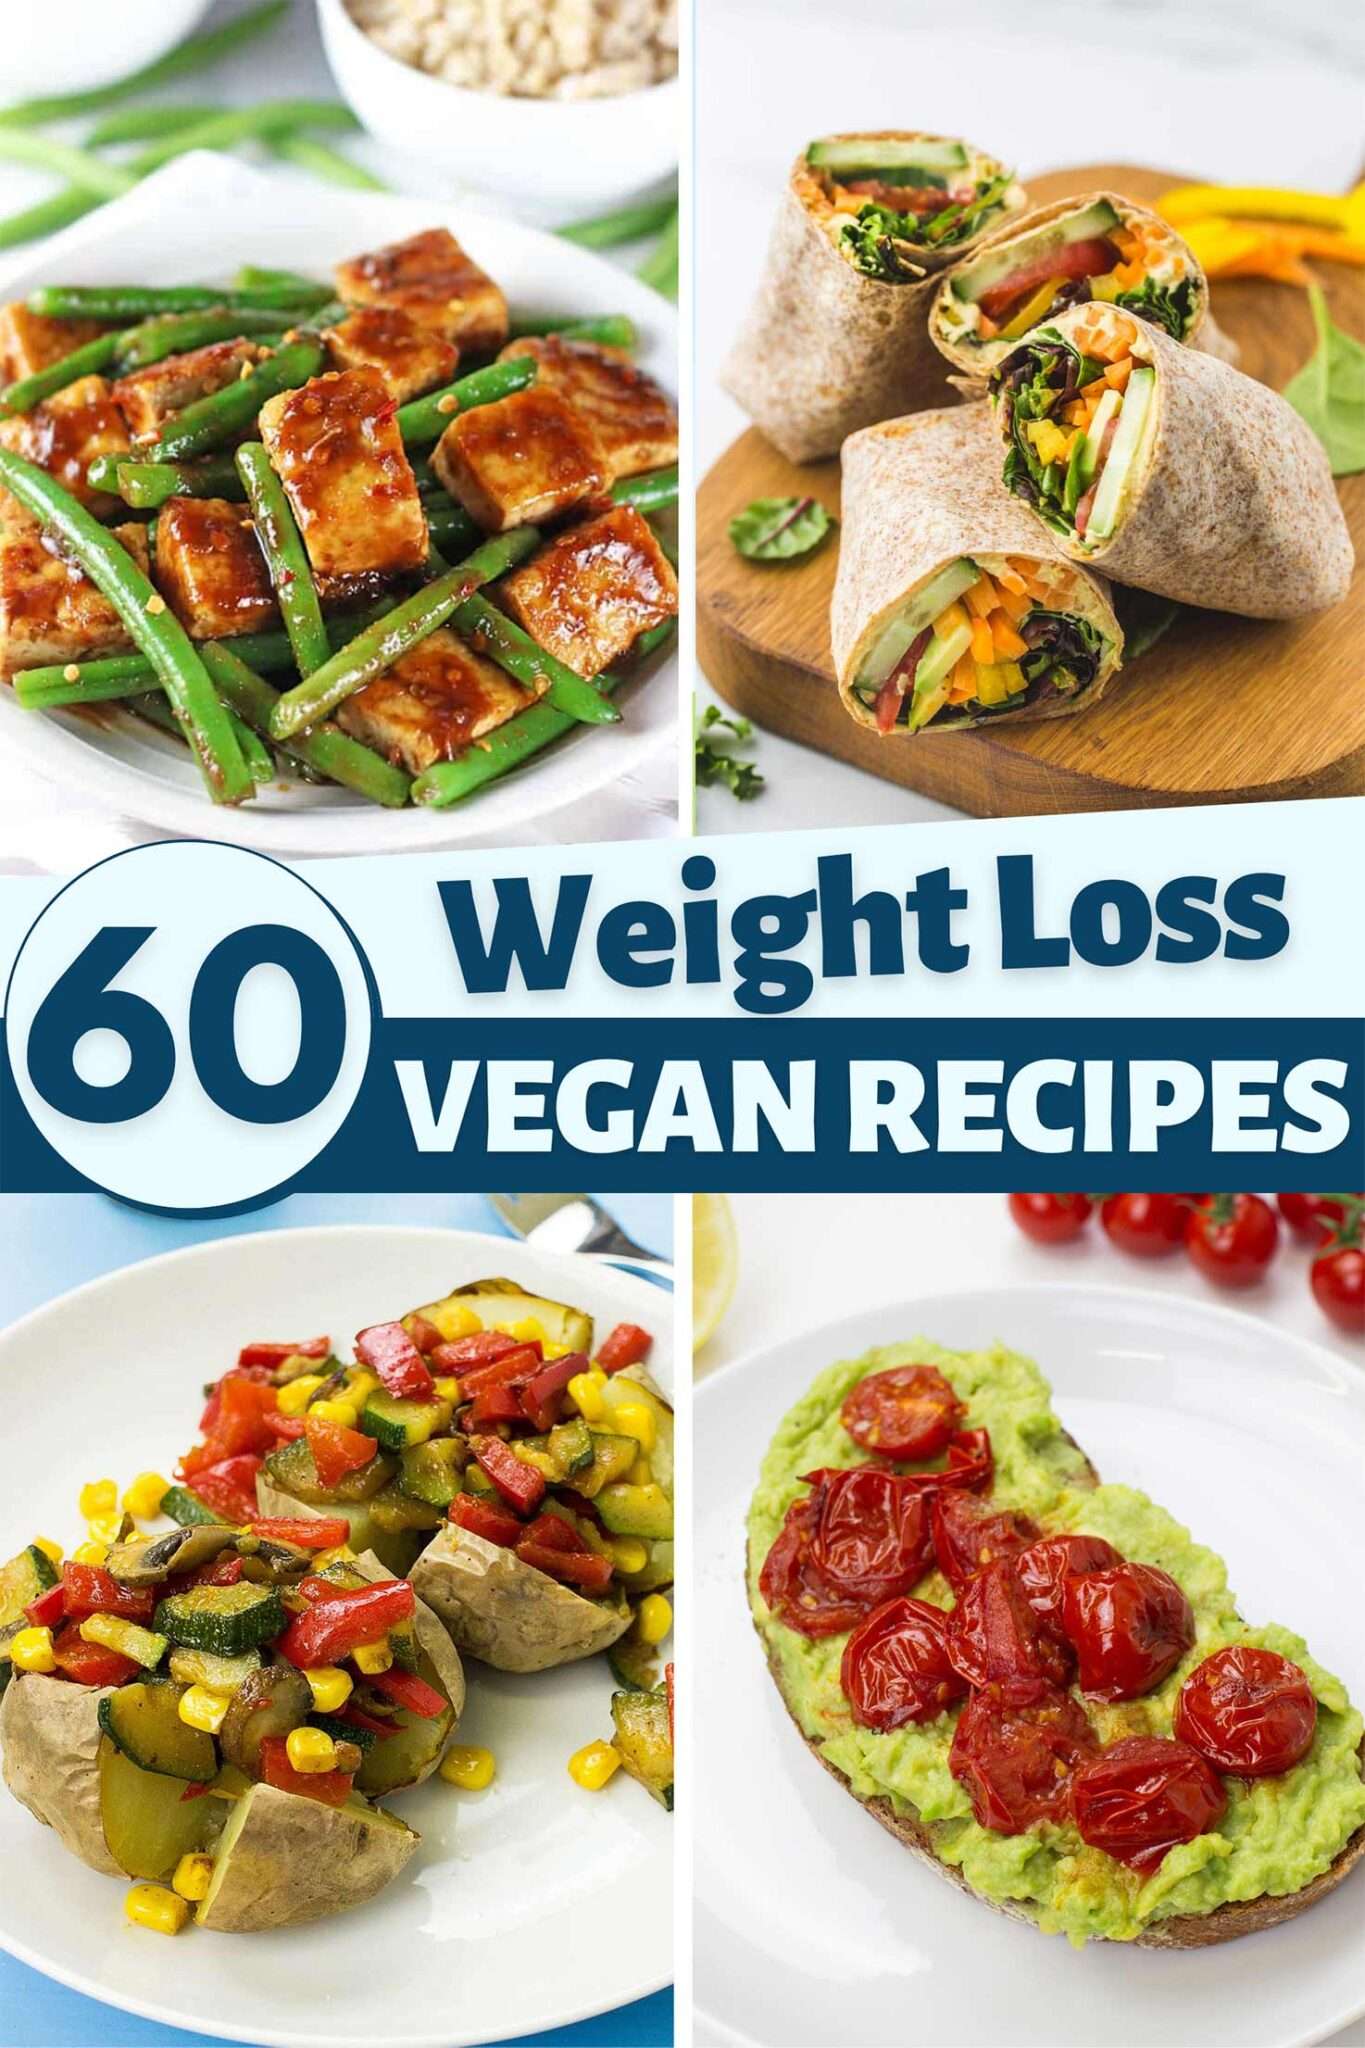 60 Deceptively Delicious Vegan Weight Loss Recipes